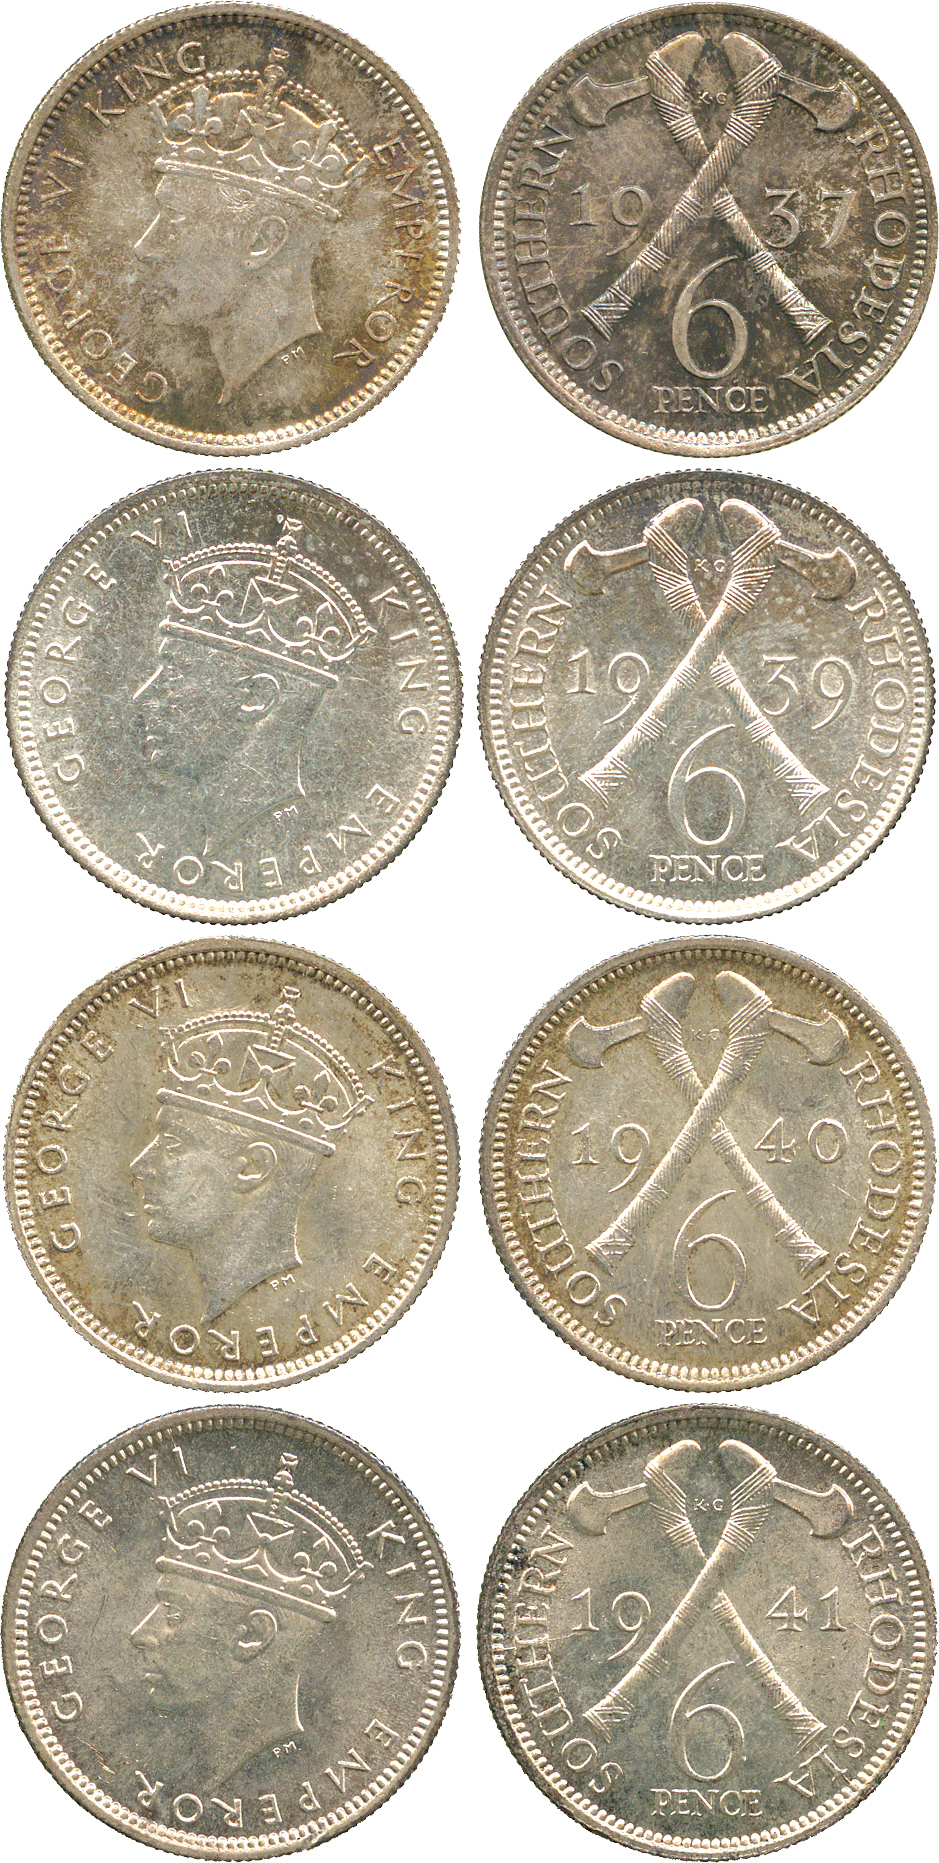 † AFRICA. Rhodesia. Southern Rhodesia. Silver 6-Pence (4), 1937, 1939, 1940, 1941 (KM 10, 17).Second